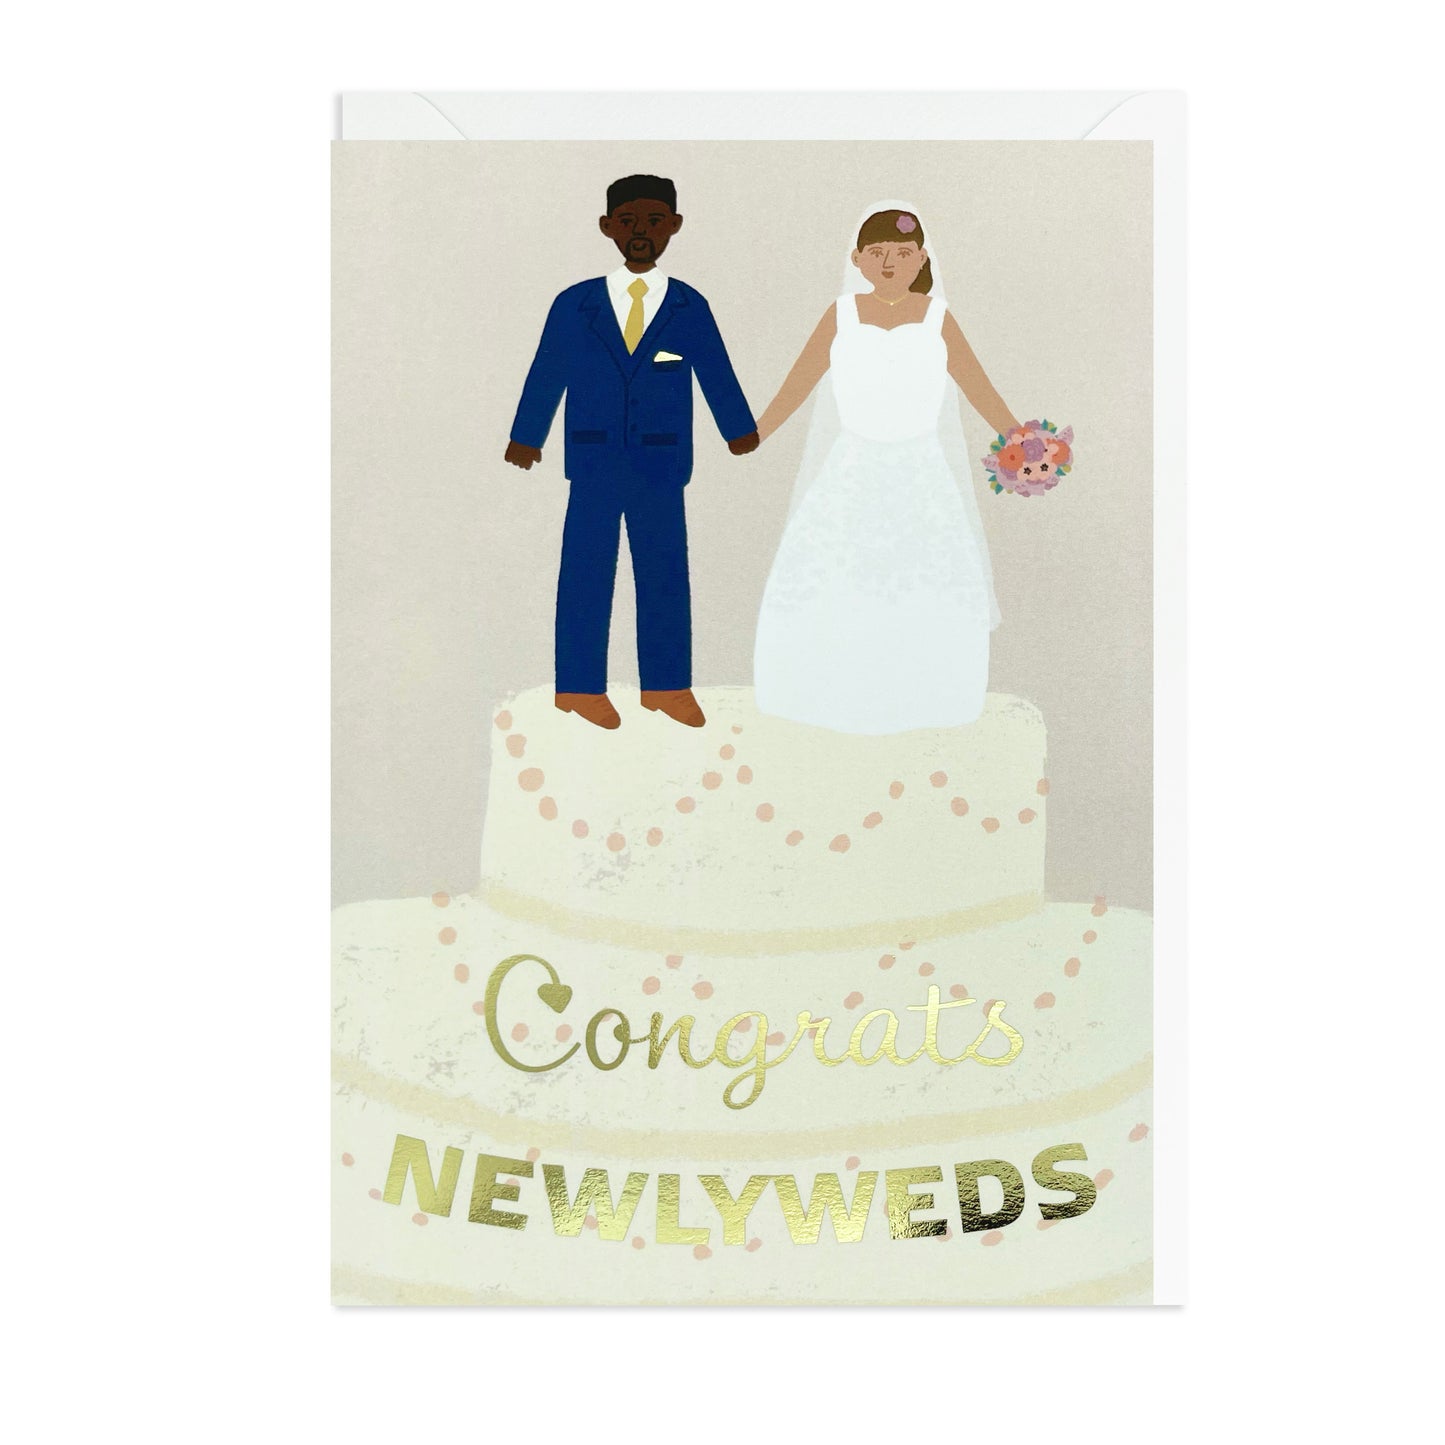 White Bride and Black Groom on top of a wedding cake. Black Greeting Card